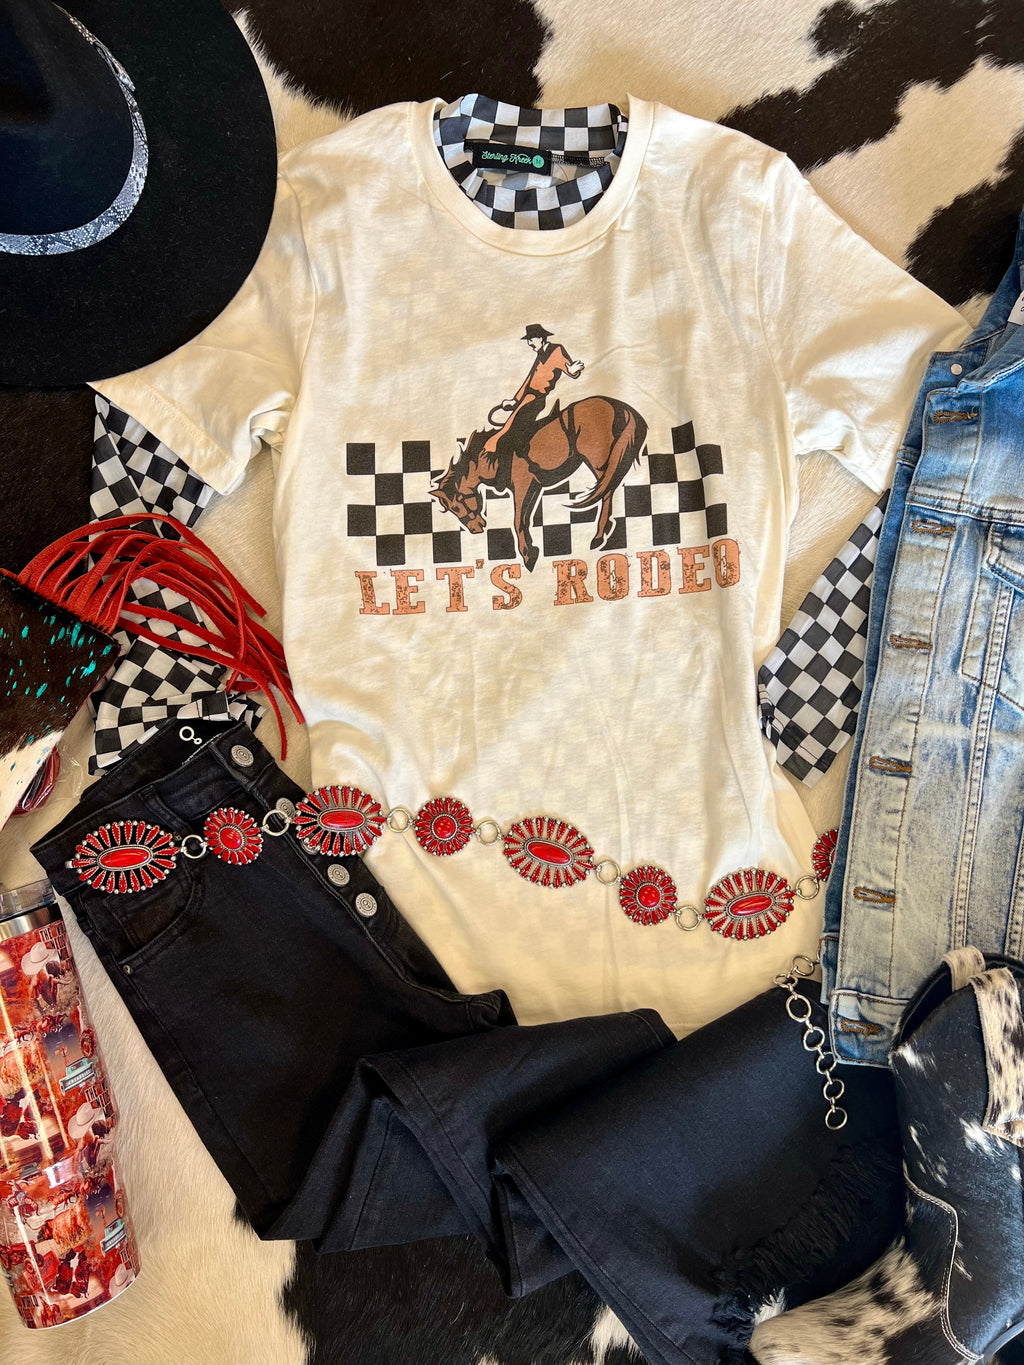 Saddle up in style with this Let's Rodeo tee! Made with 100% cotton, this cream-colored shirt features a checkered horse and cowboy graphic, perfect for any cowboy or cowgirl. Whether you're at a rodeo or just want to add some western flair to your wardrobe, this tee is sure to be a hit. Giddy up!